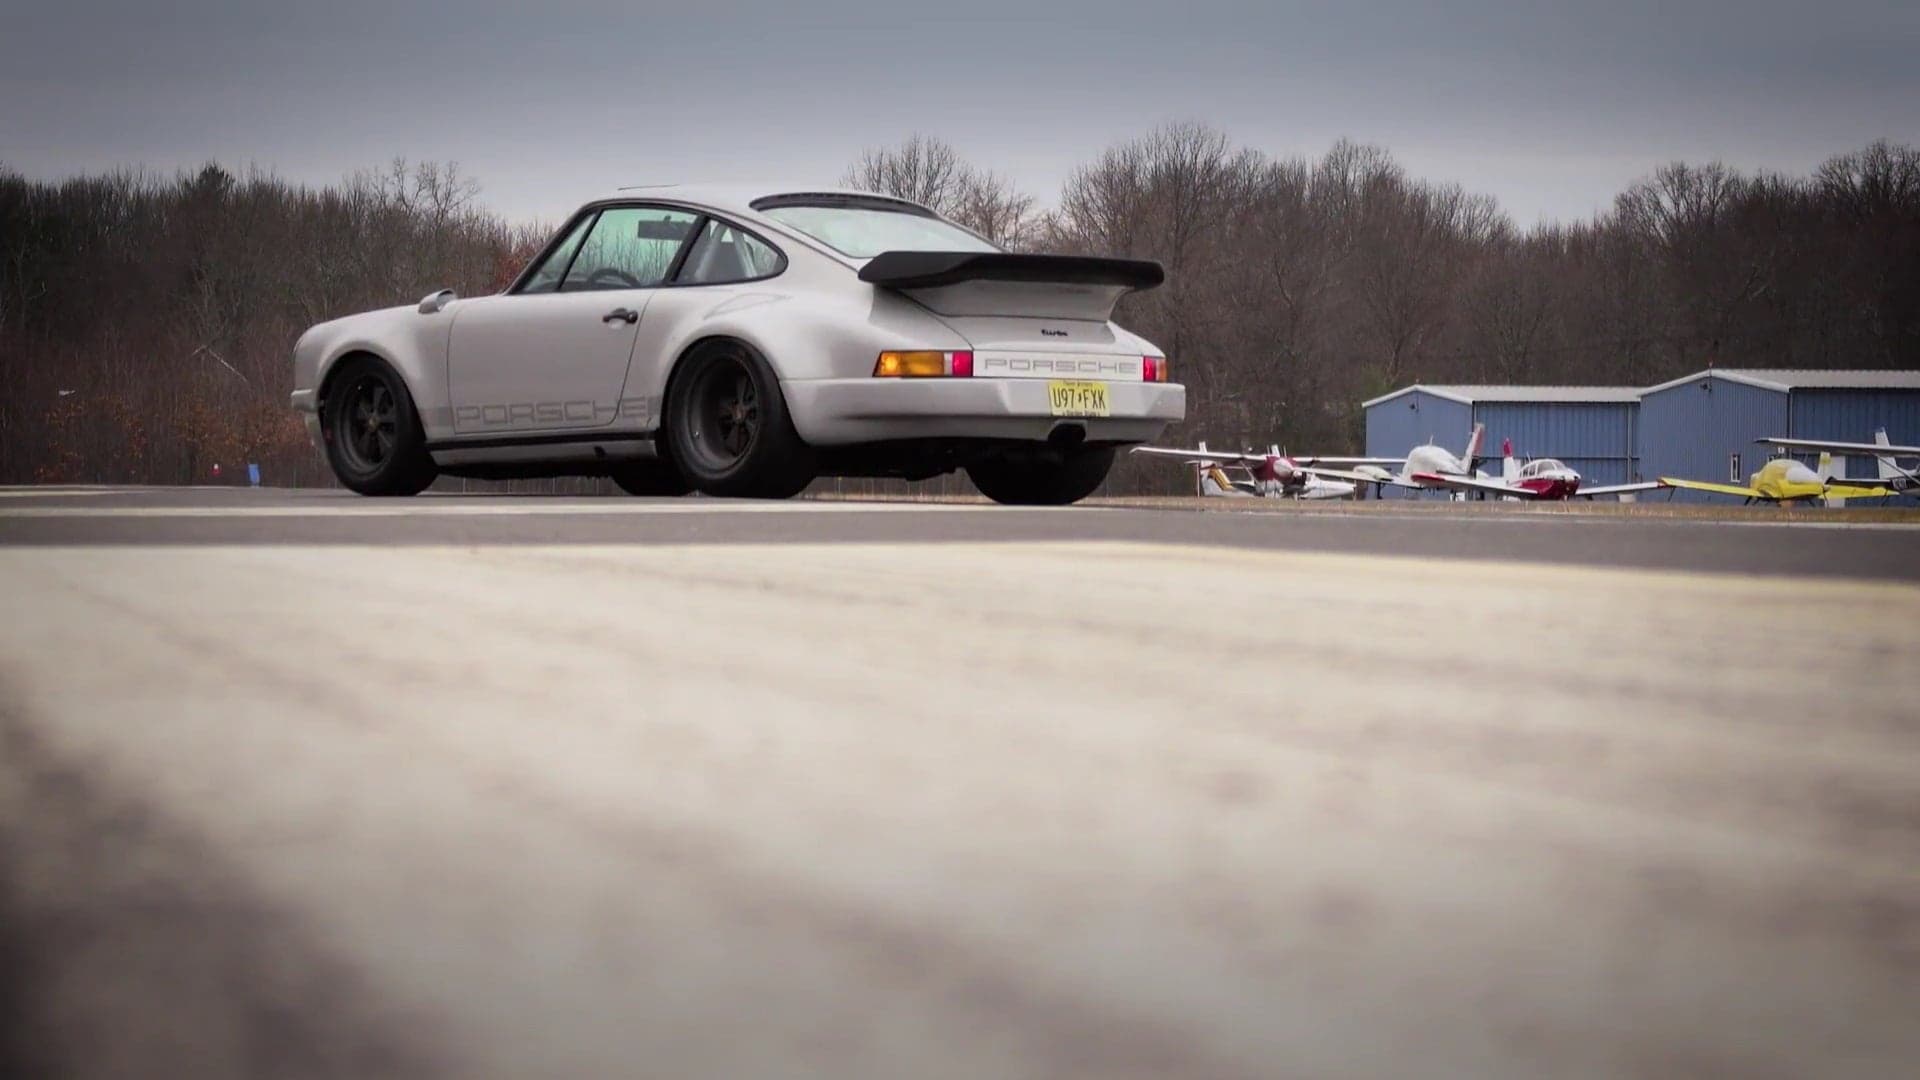 Rob Ida’s 911 Turbo Hot Rod Proves That Less Is More